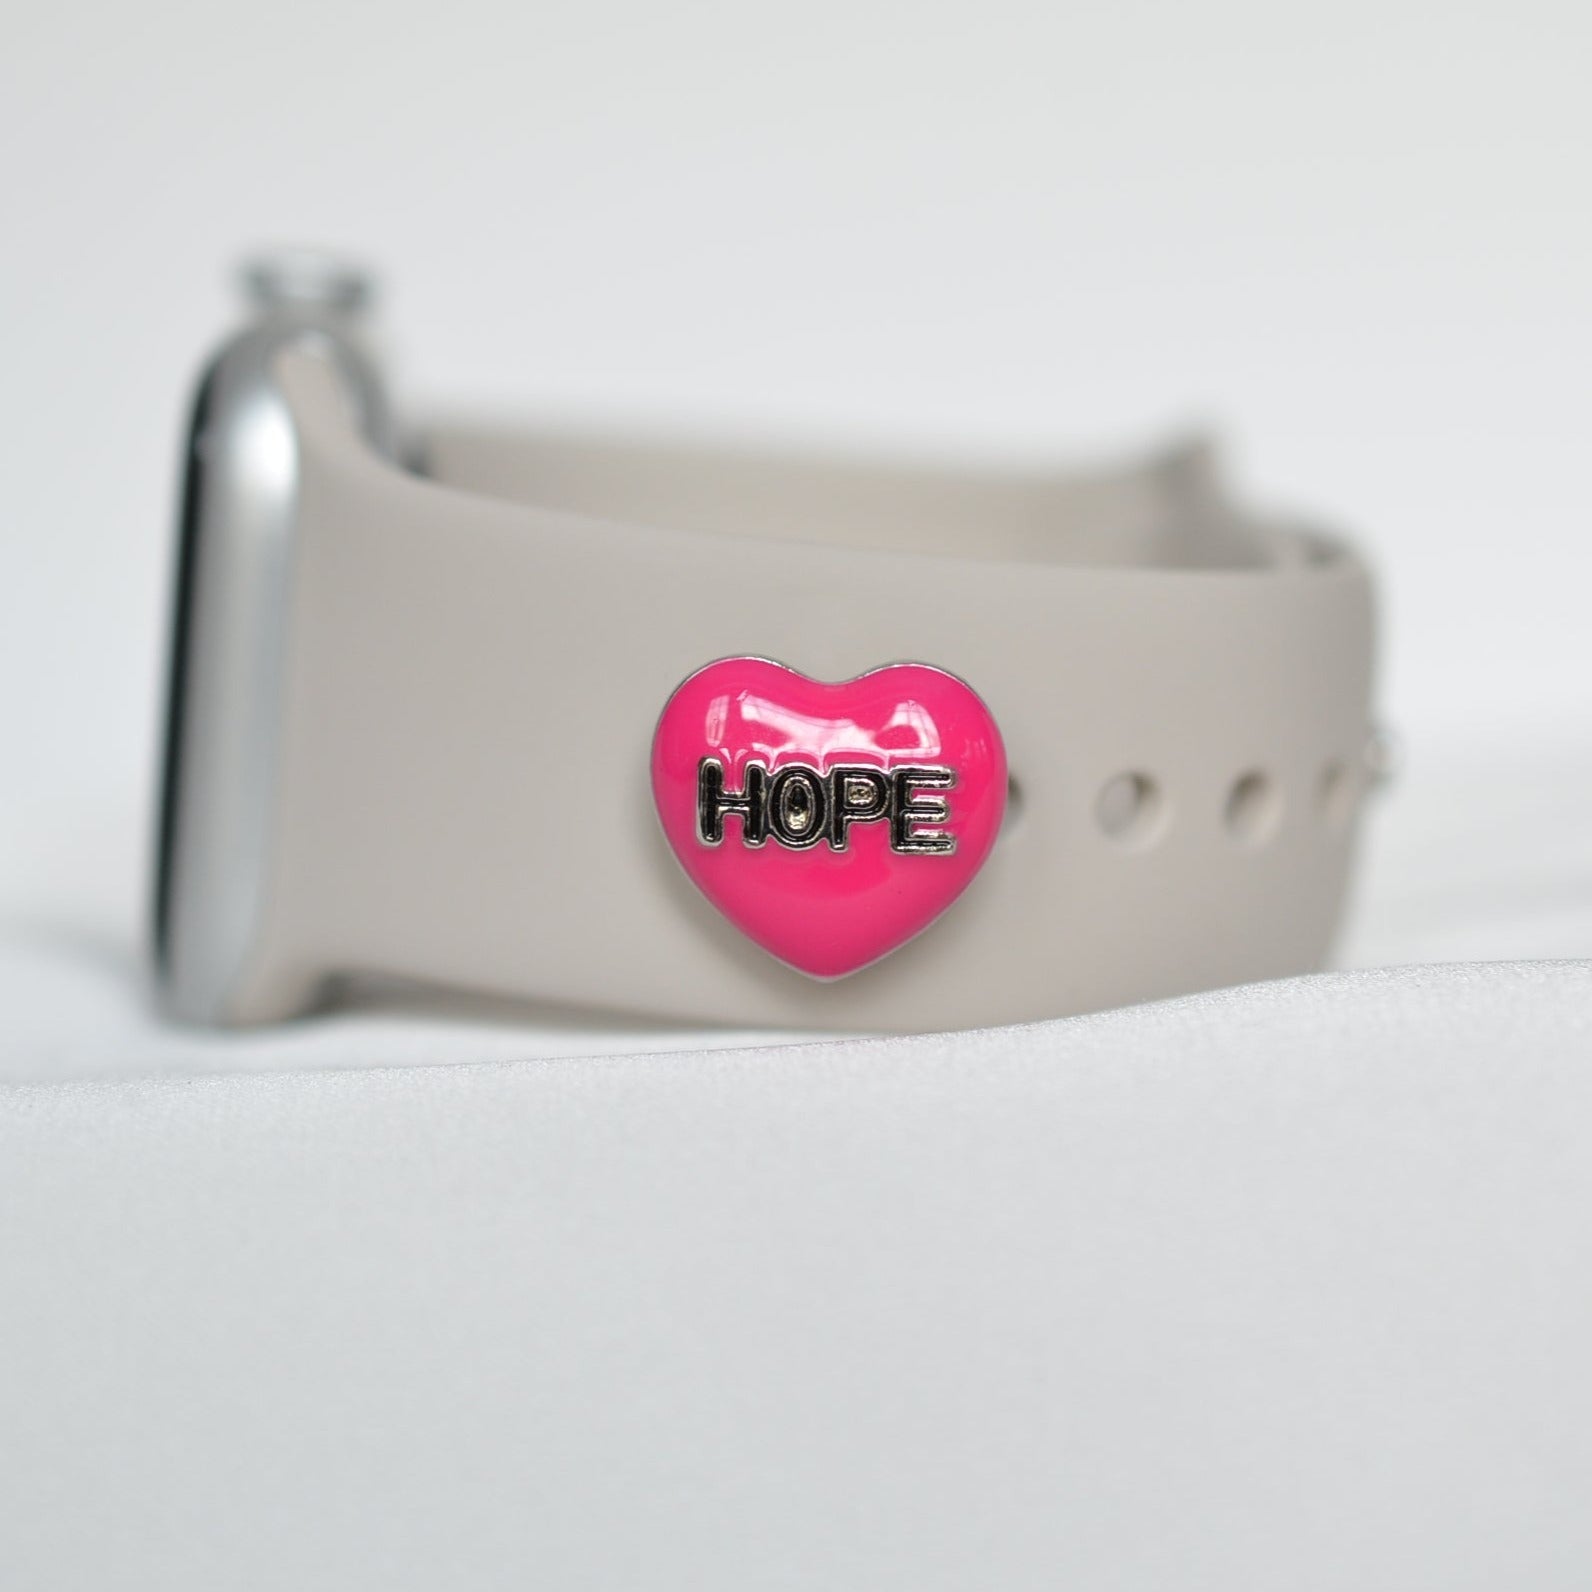 Hope Charm for Belts, Bags and Watch Bands